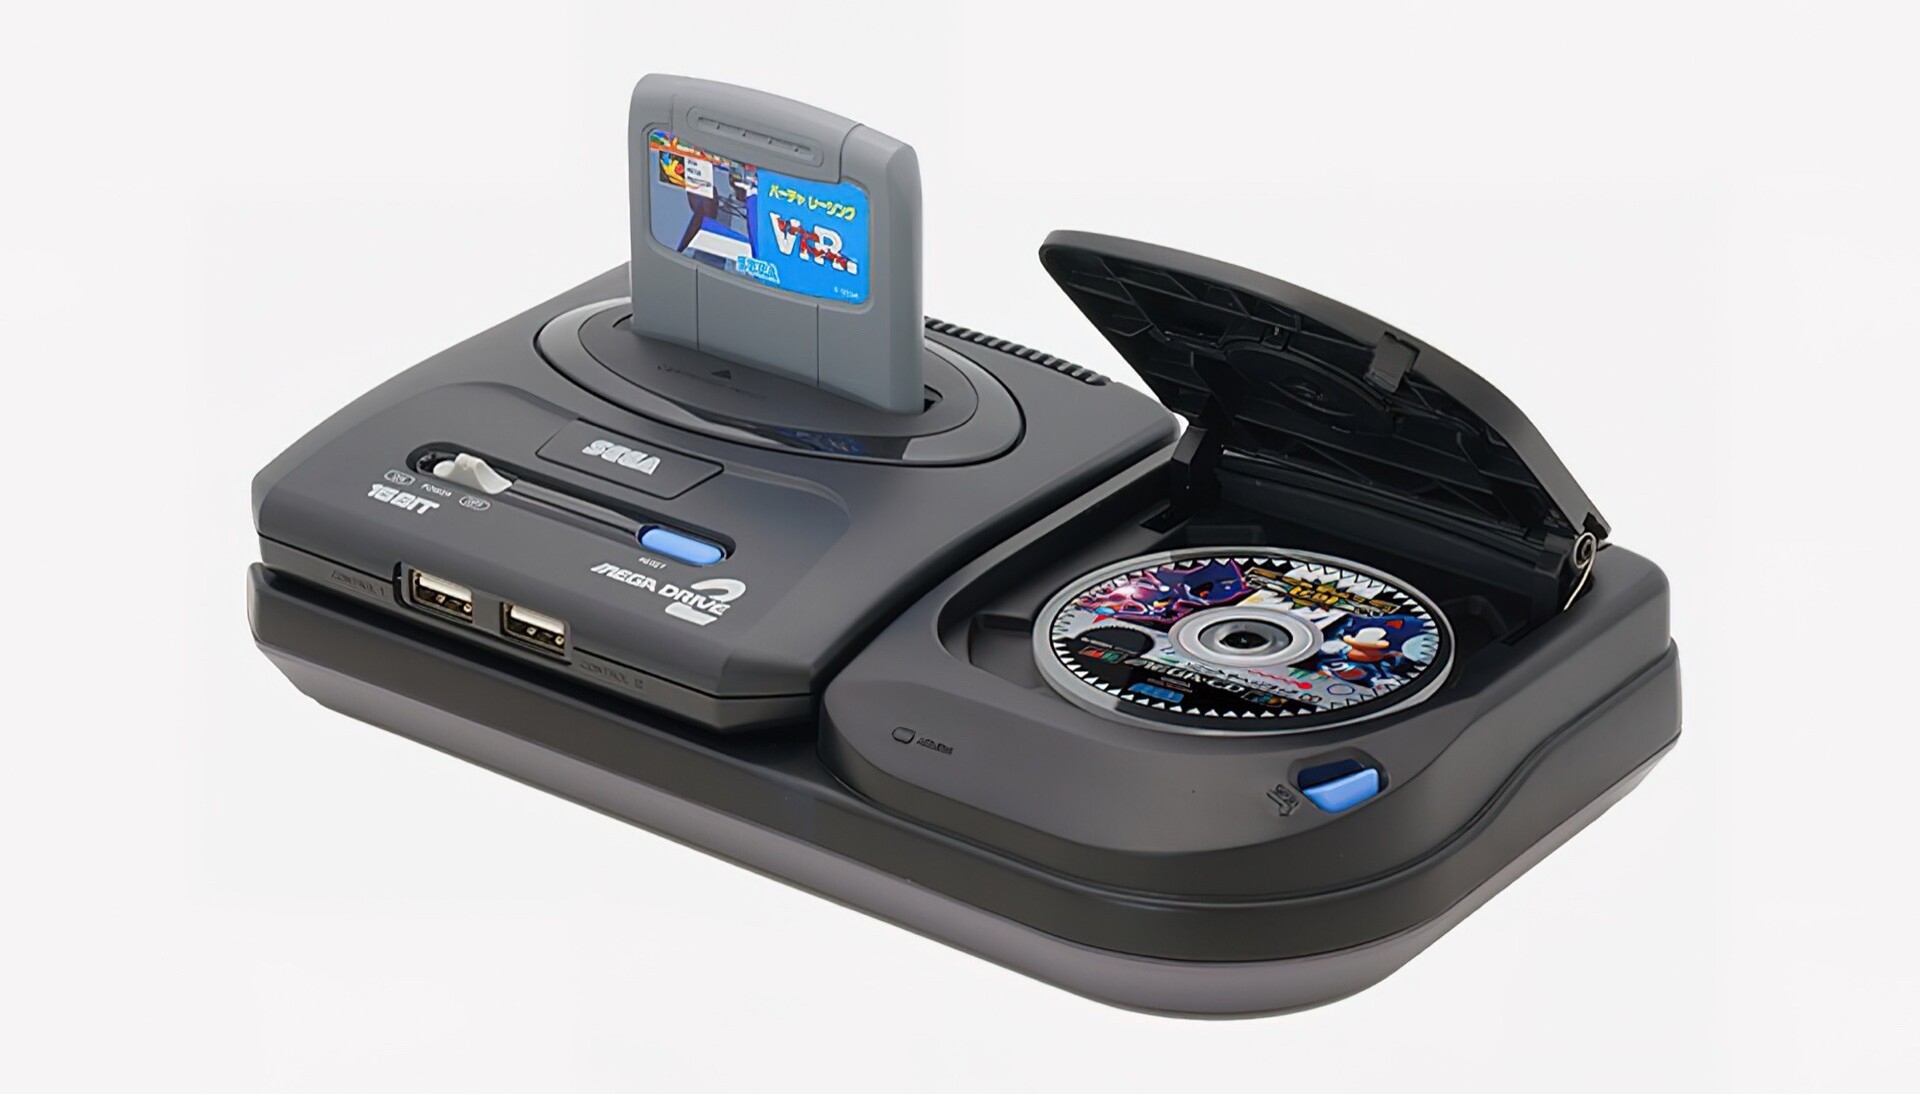 Bounty ethics hot SEGA Mega Drive Mini 2 console to launch in October with 50 games and  decorative Mega CD expansion - NotebookCheck.net News